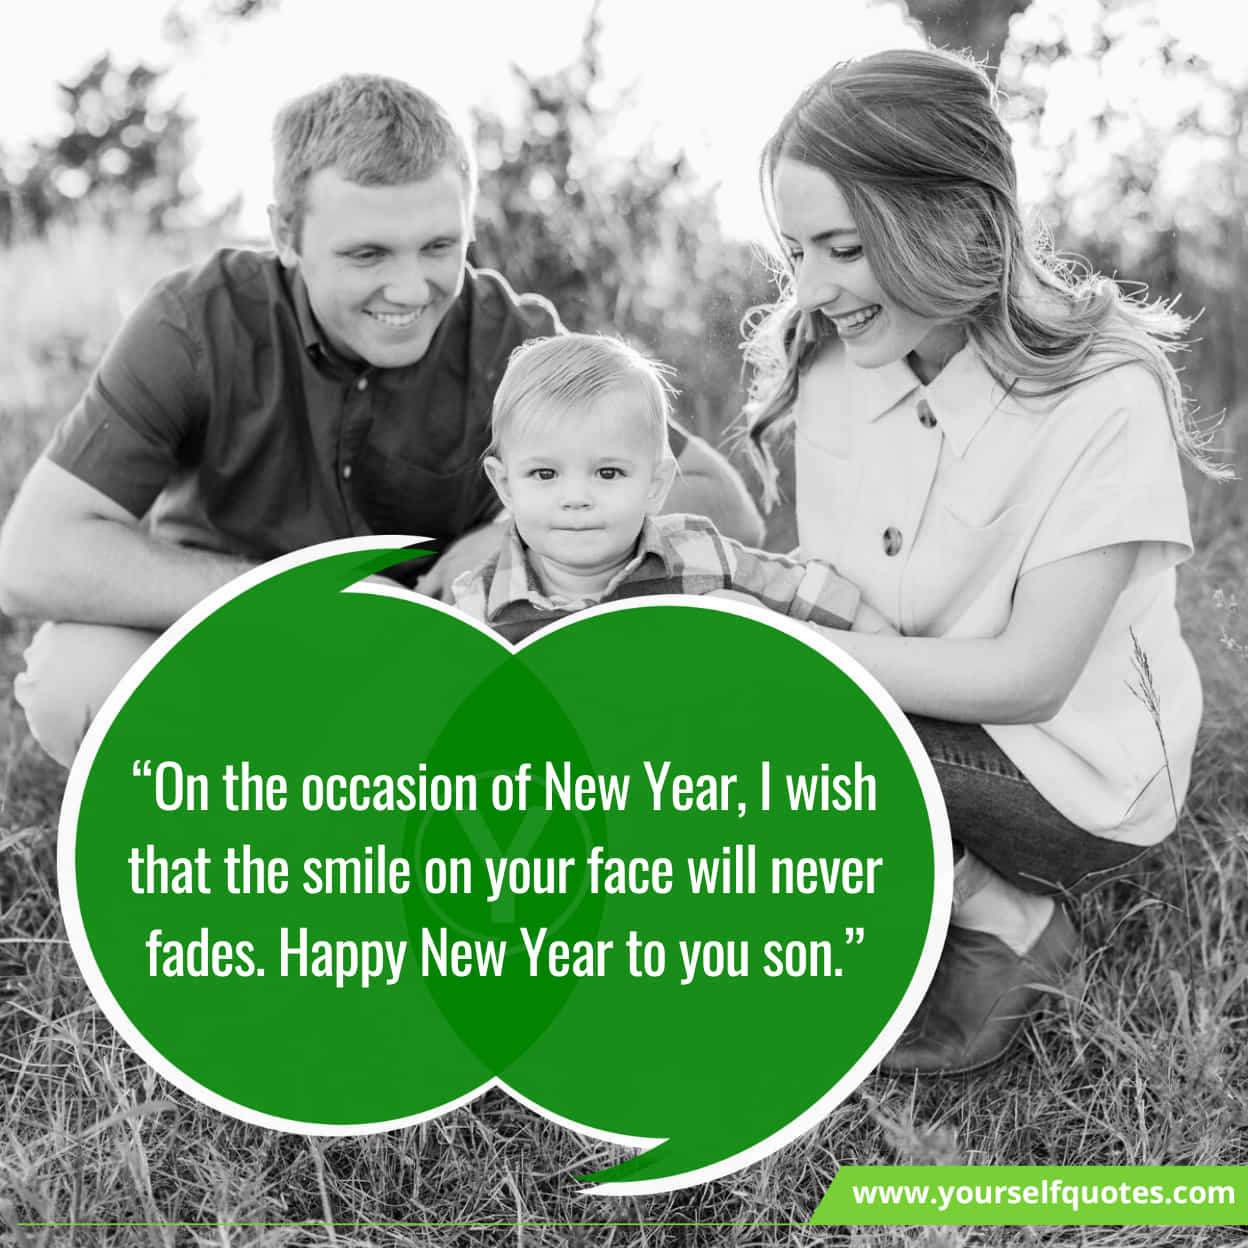 Alluring For Son About Happy New Year